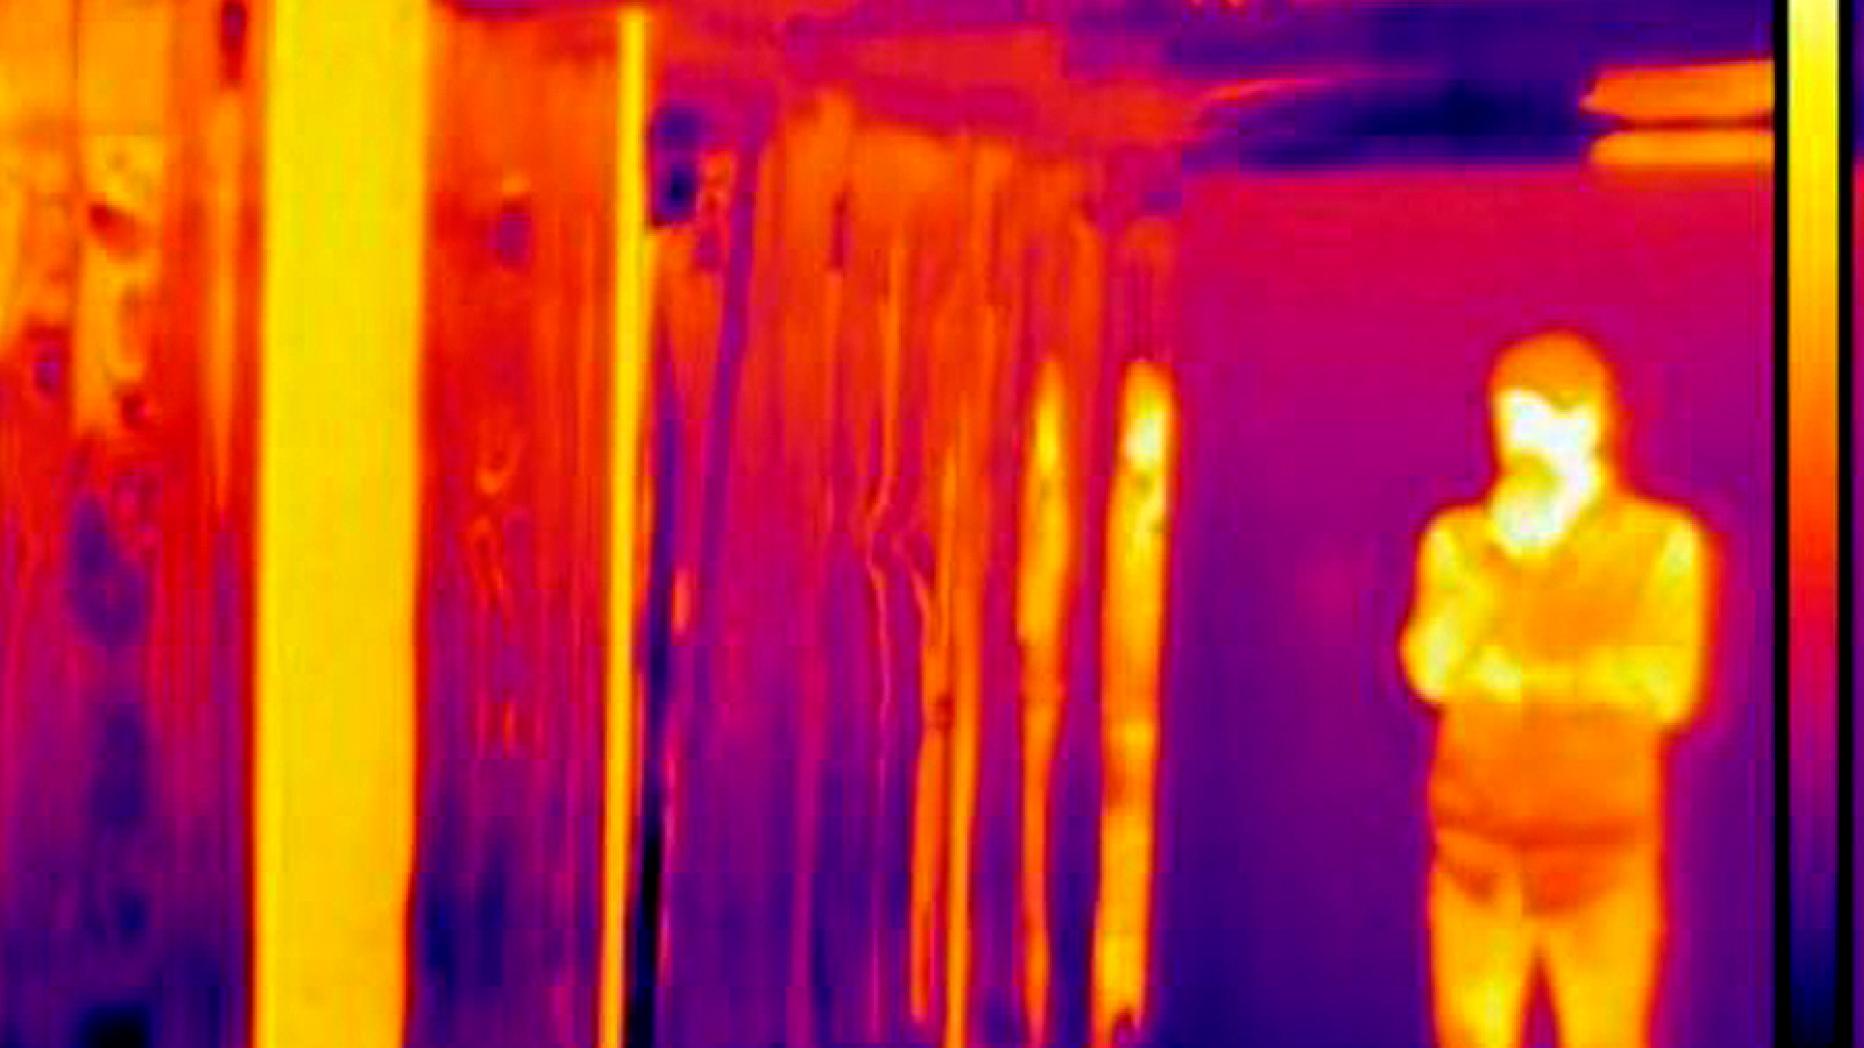 Infrared photograph of a person standing surrounded by hot and cold surfaces